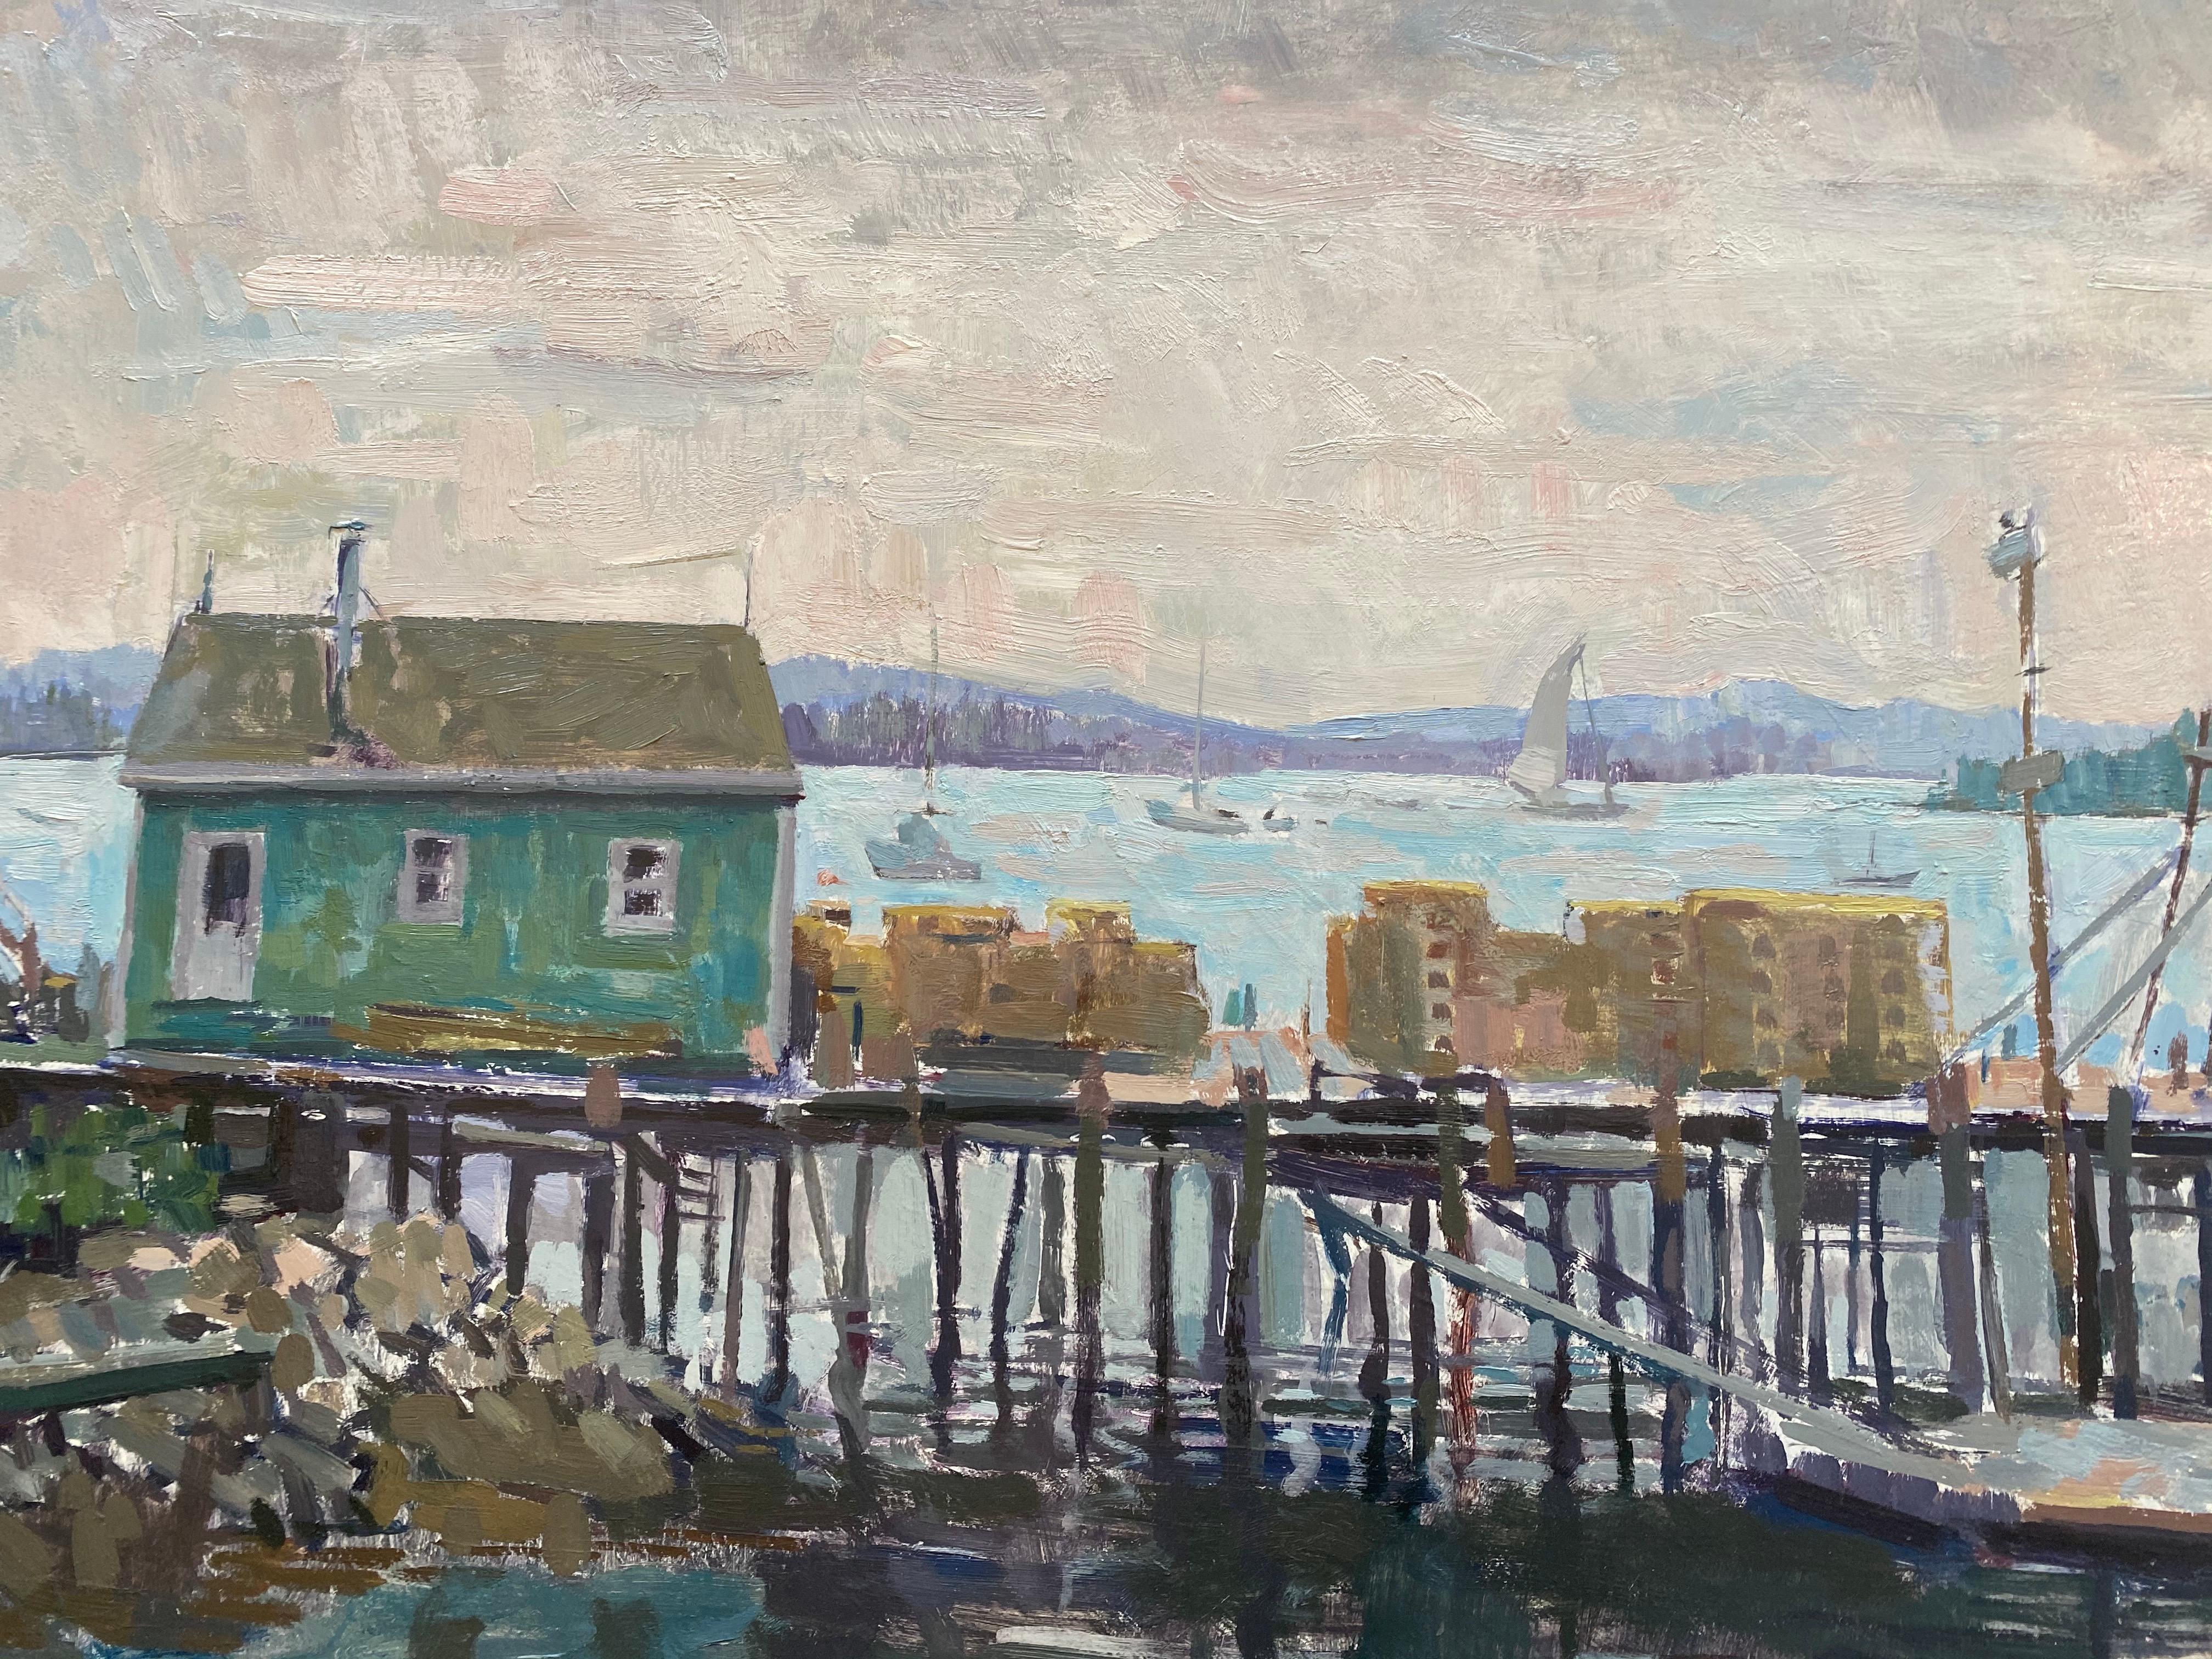 Painted en plein air, in the style of contemporary impressionism. An old dock jutts out from shore, into the body of water. A single blue structure floats atop the edge of the dock. Stacks of boxes, or lobster traps sit atop.Boats float in the